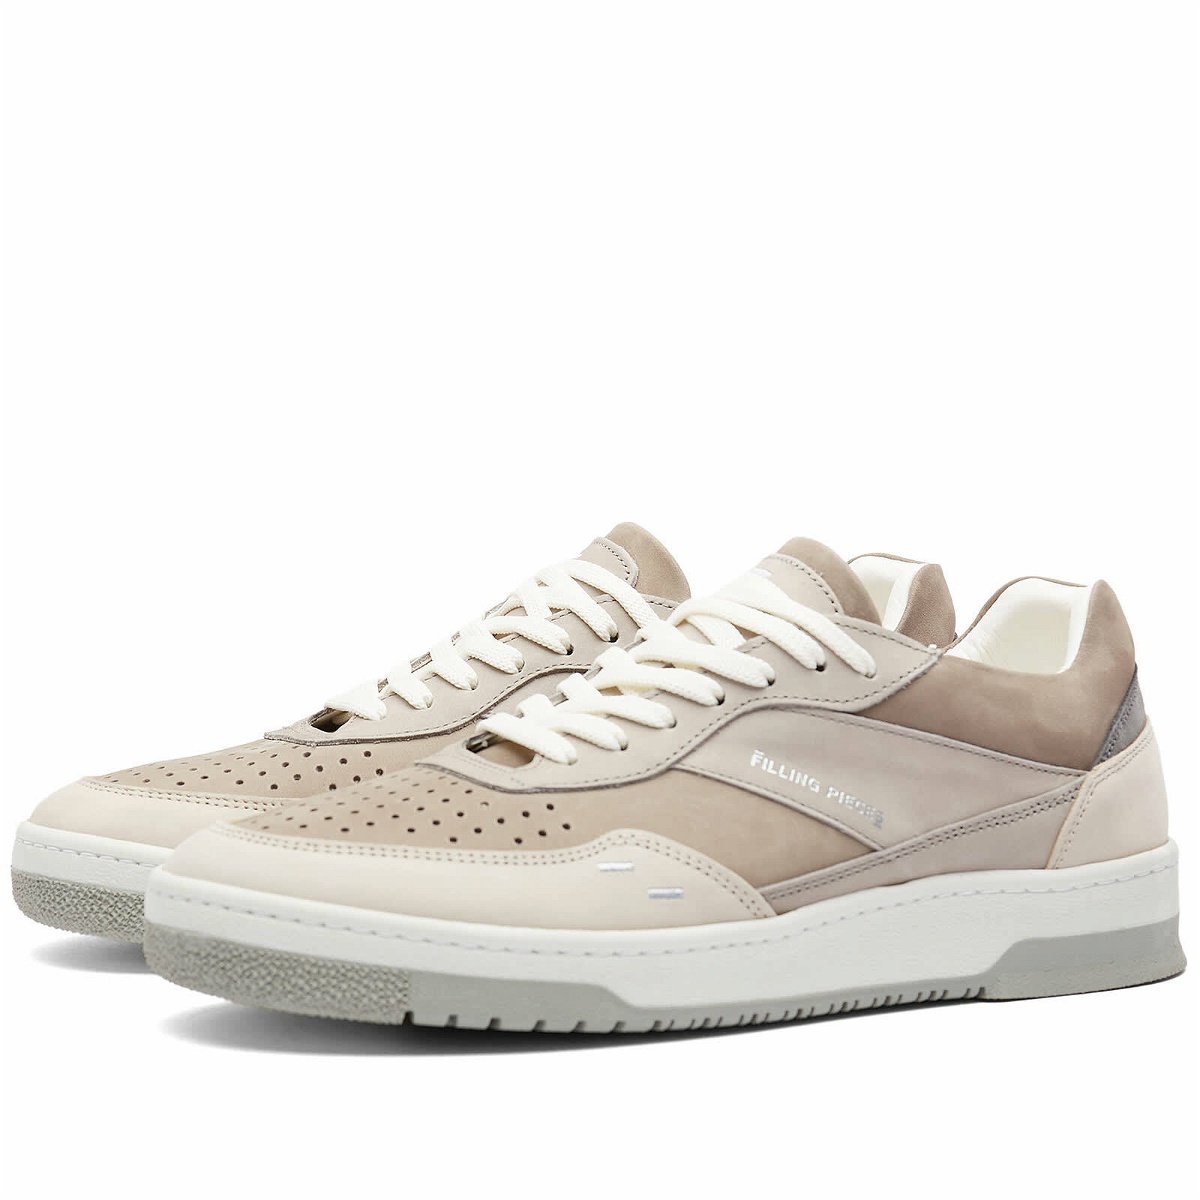 Photo: Filling Pieces Men's Ace Spin Sneakers in Beige